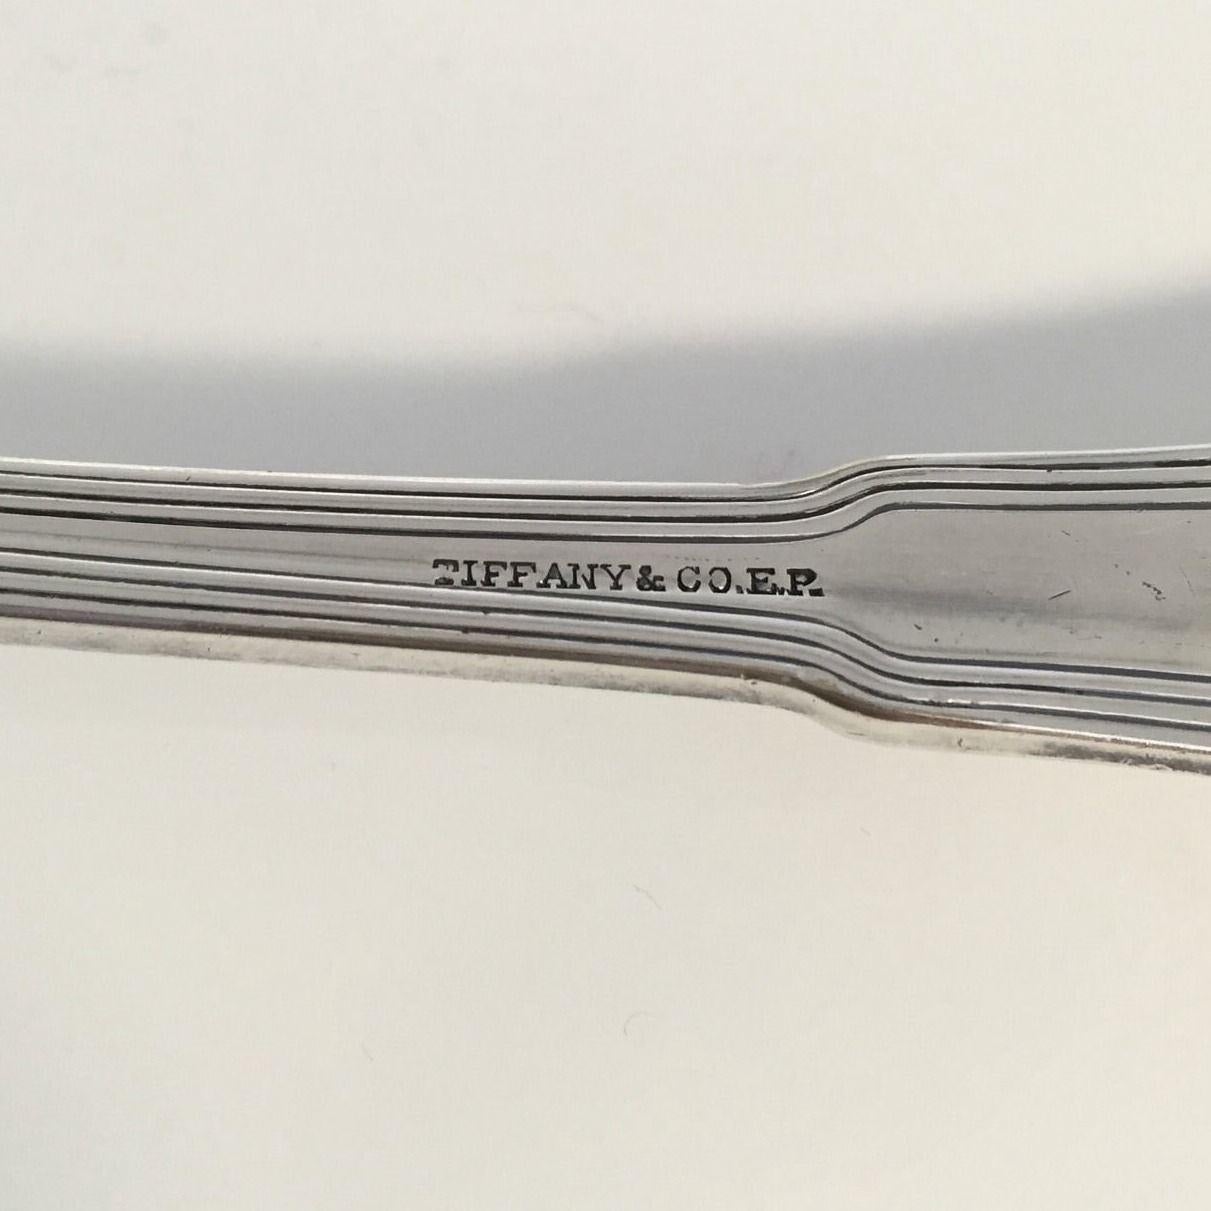 Tiffany & Co. Makers Silver Plated Whittier 1907 Large Flat Handle Crumb Knife In Good Condition For Sale In Washington Depot, CT